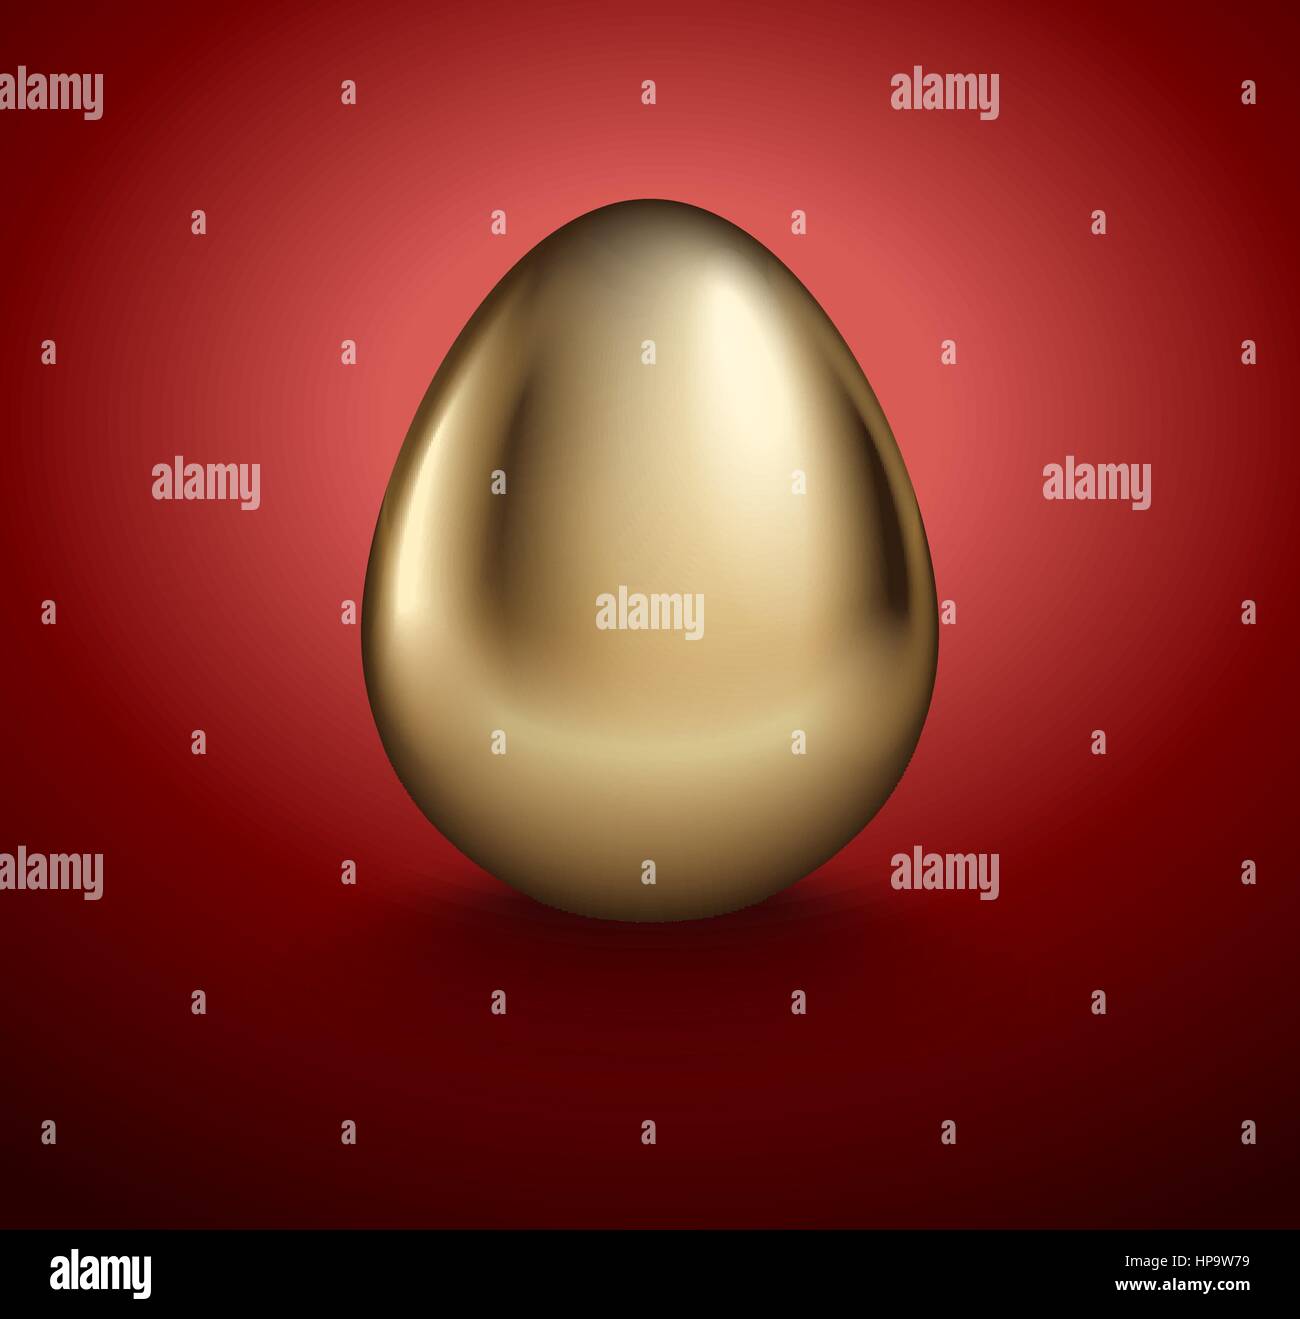 Glossy realistic golden egg. Isolated on red background. Vintage banner, card, poster for Easter, business benefit concept. Stock Vector